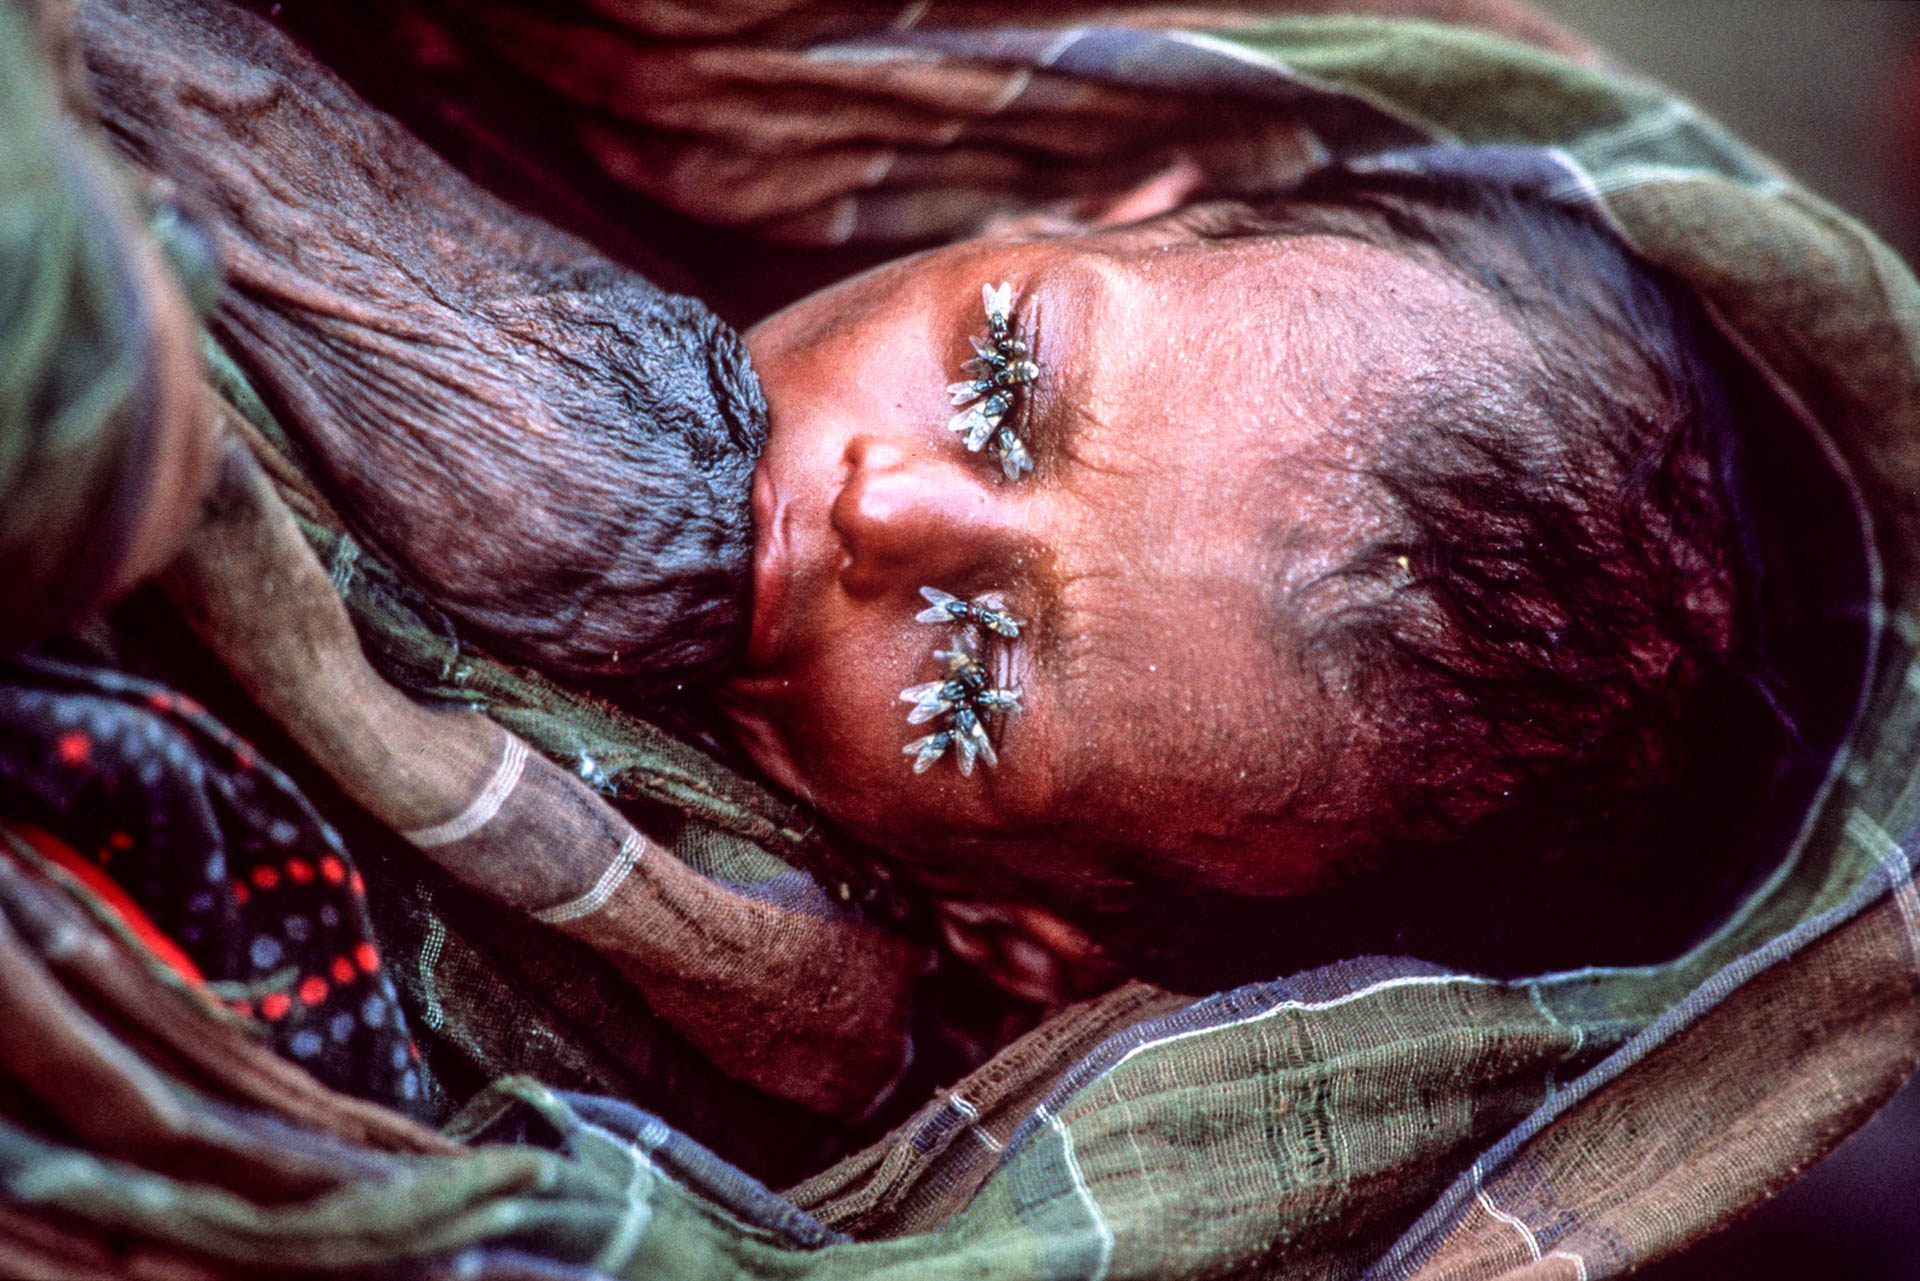  Bardera, Somalia - December 1992 A child with his eyes covered by flies, tries to drink milk from the mother's shriveled breast. 